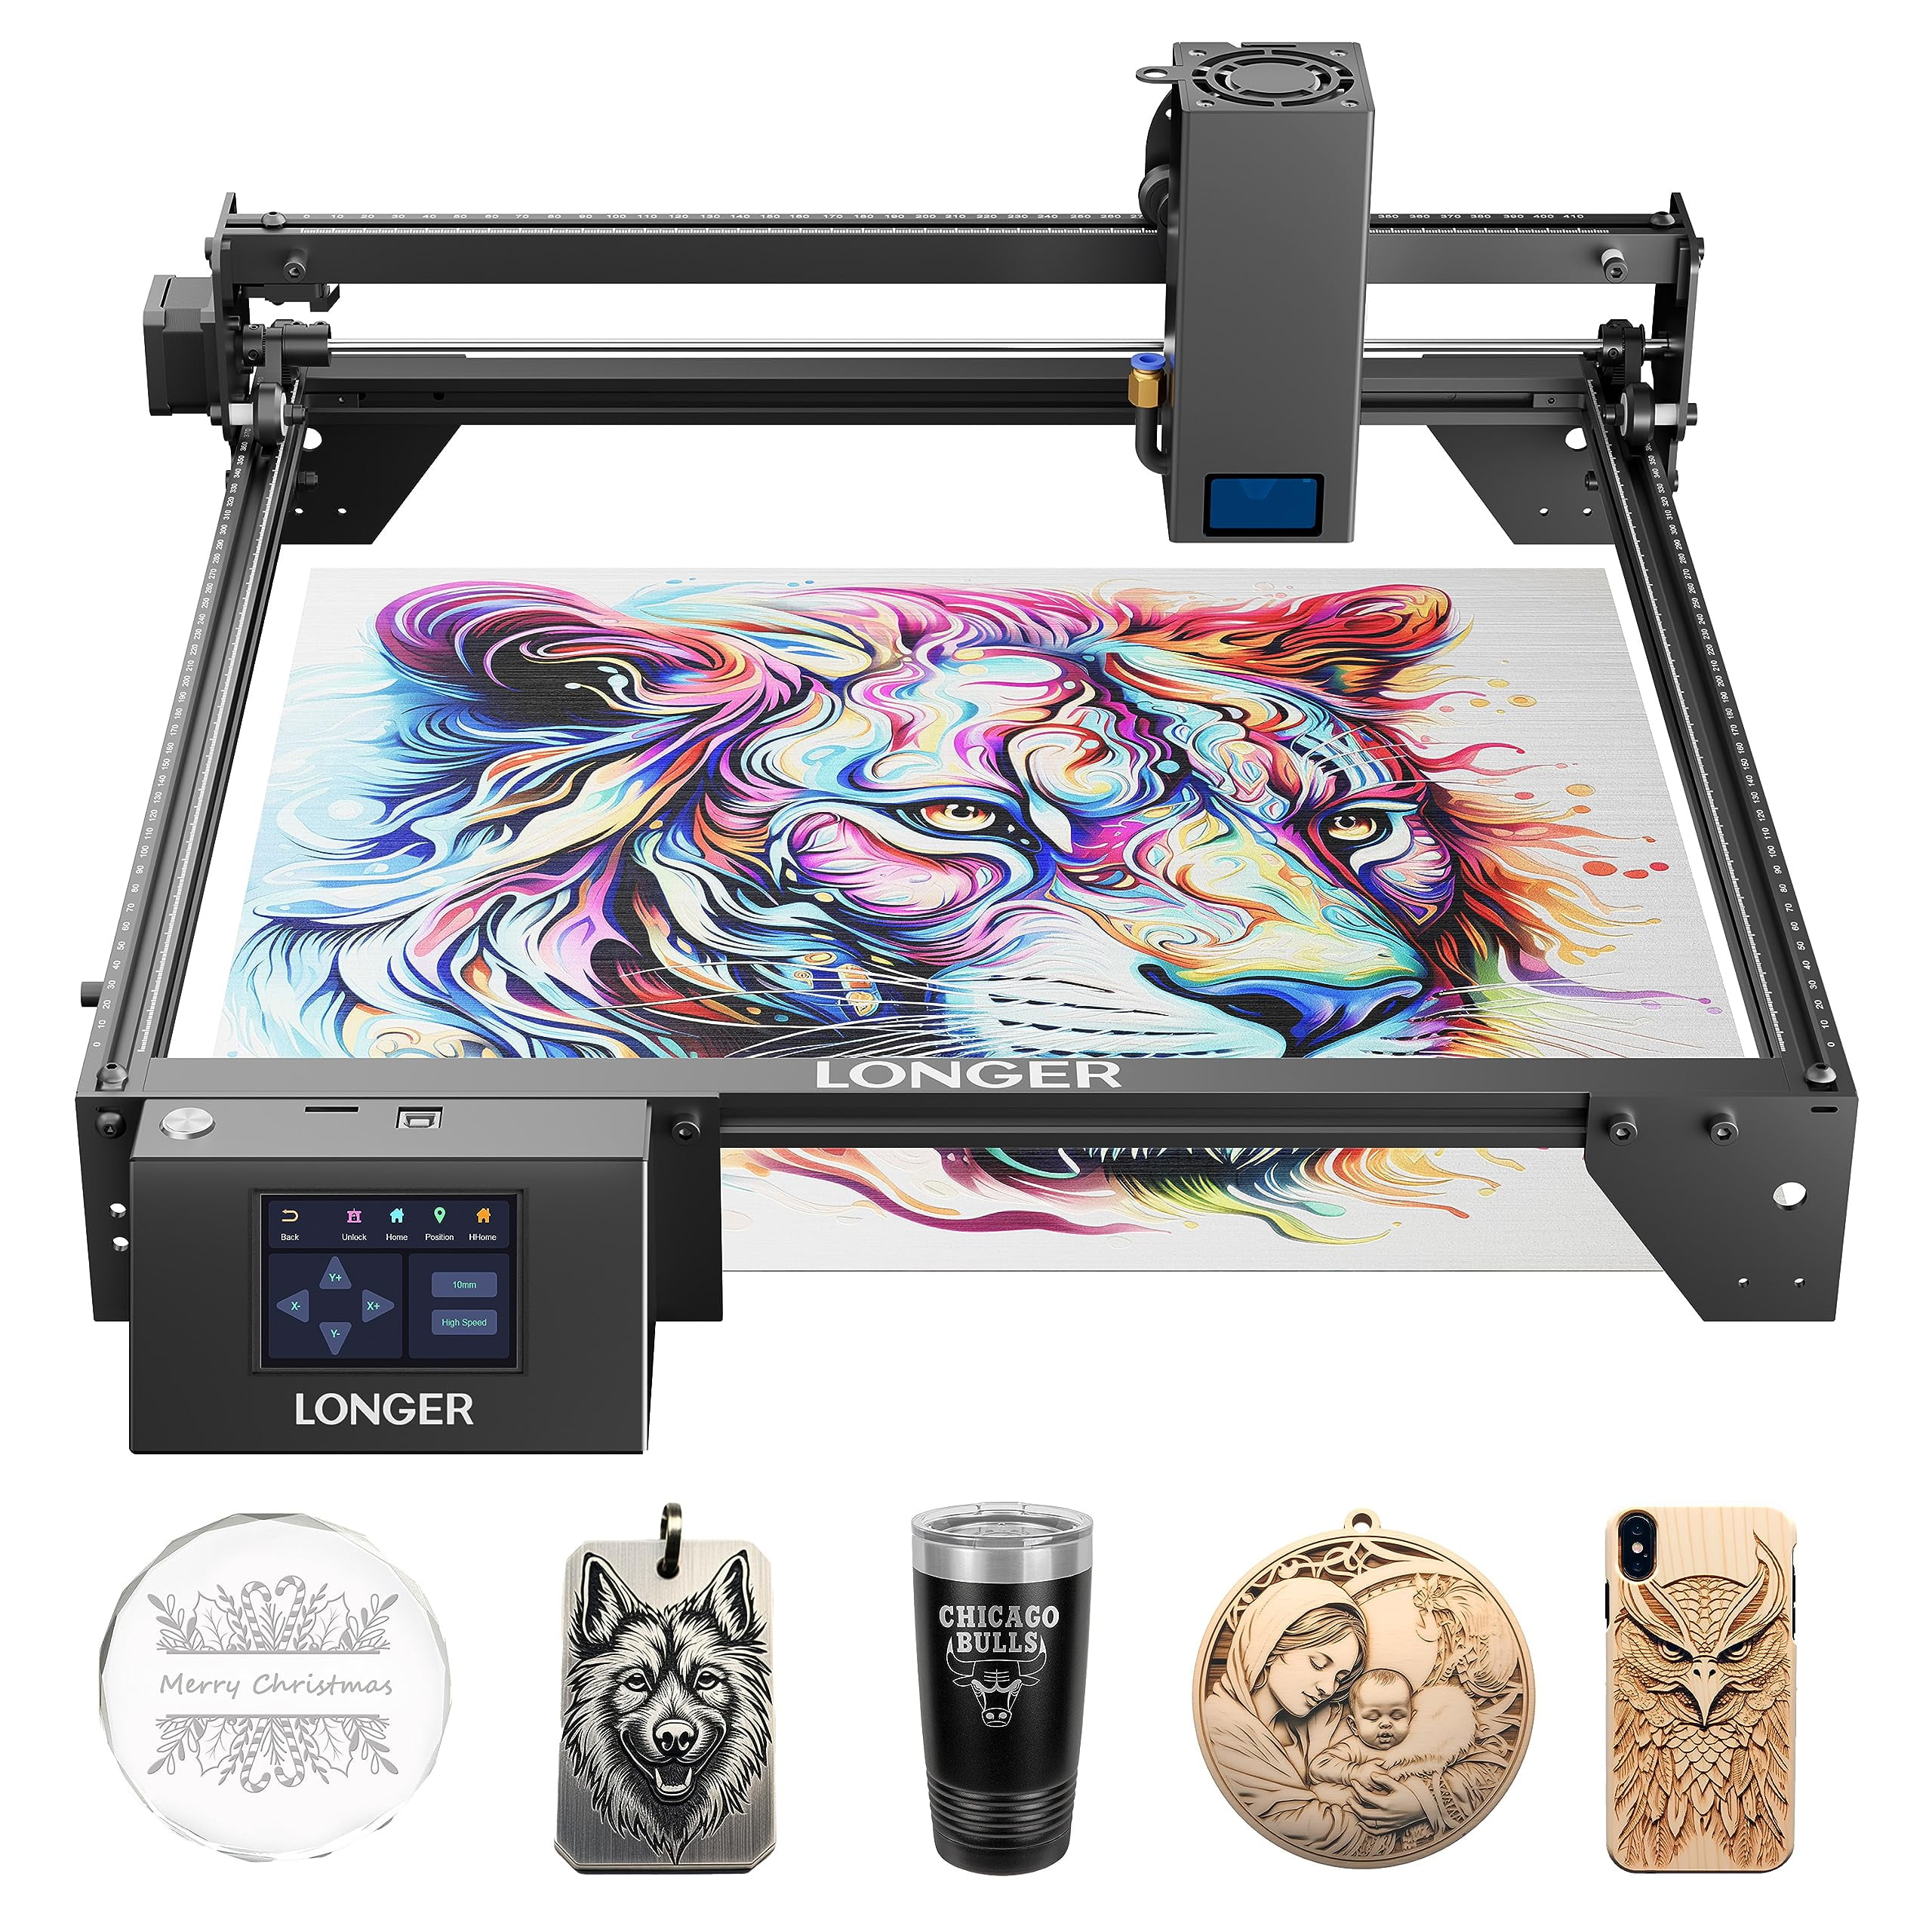 LONGER Laser Engravers Reviews, Specs, Prices - GearBerry